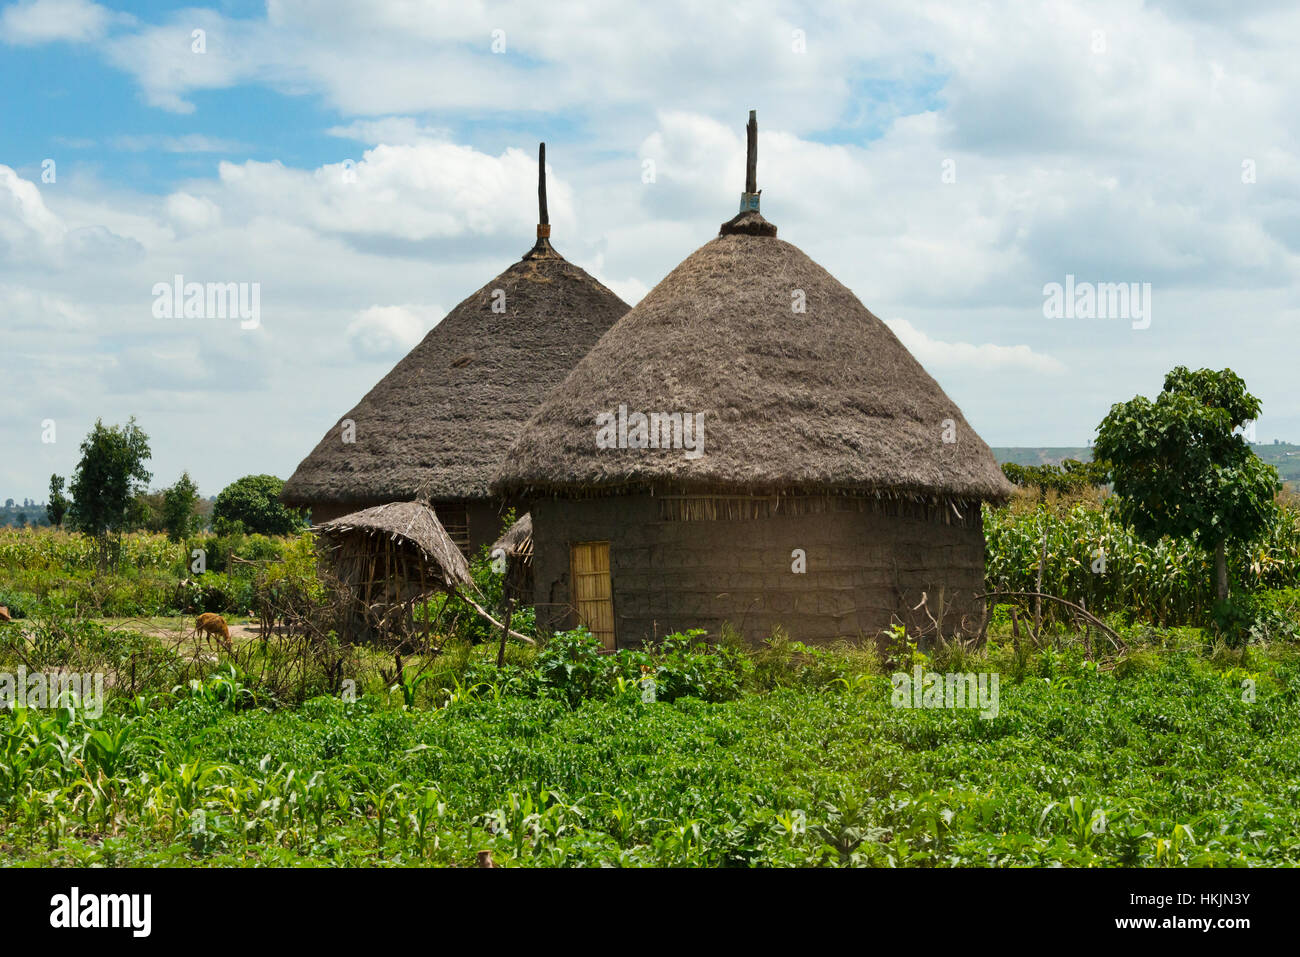 Traditional houses with thatched roof, thiopia Stock Photo